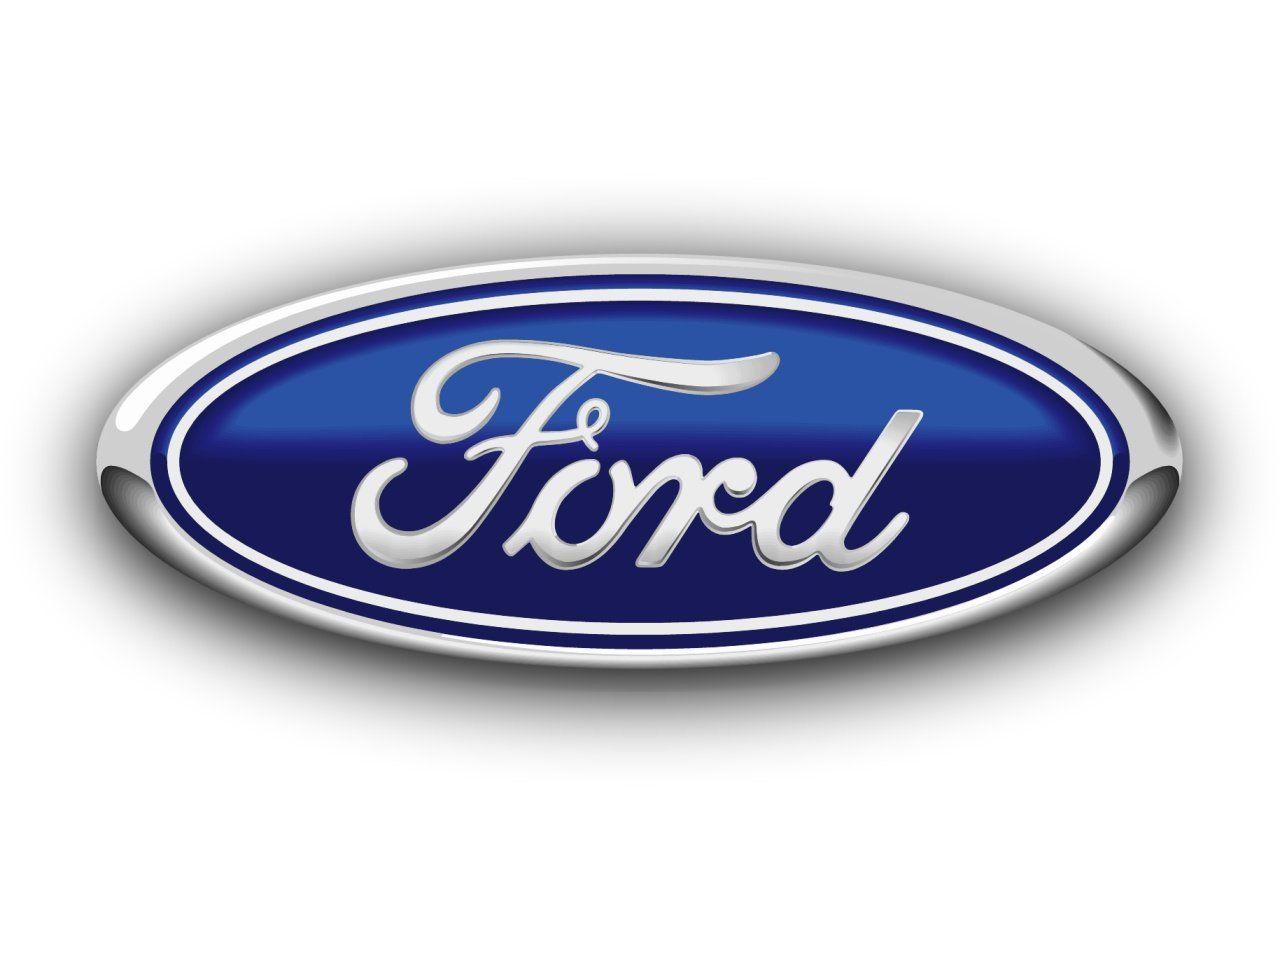 Small Ford Logo - FORD : Ford Company Car Logo New & Old. Small ford logo. ford